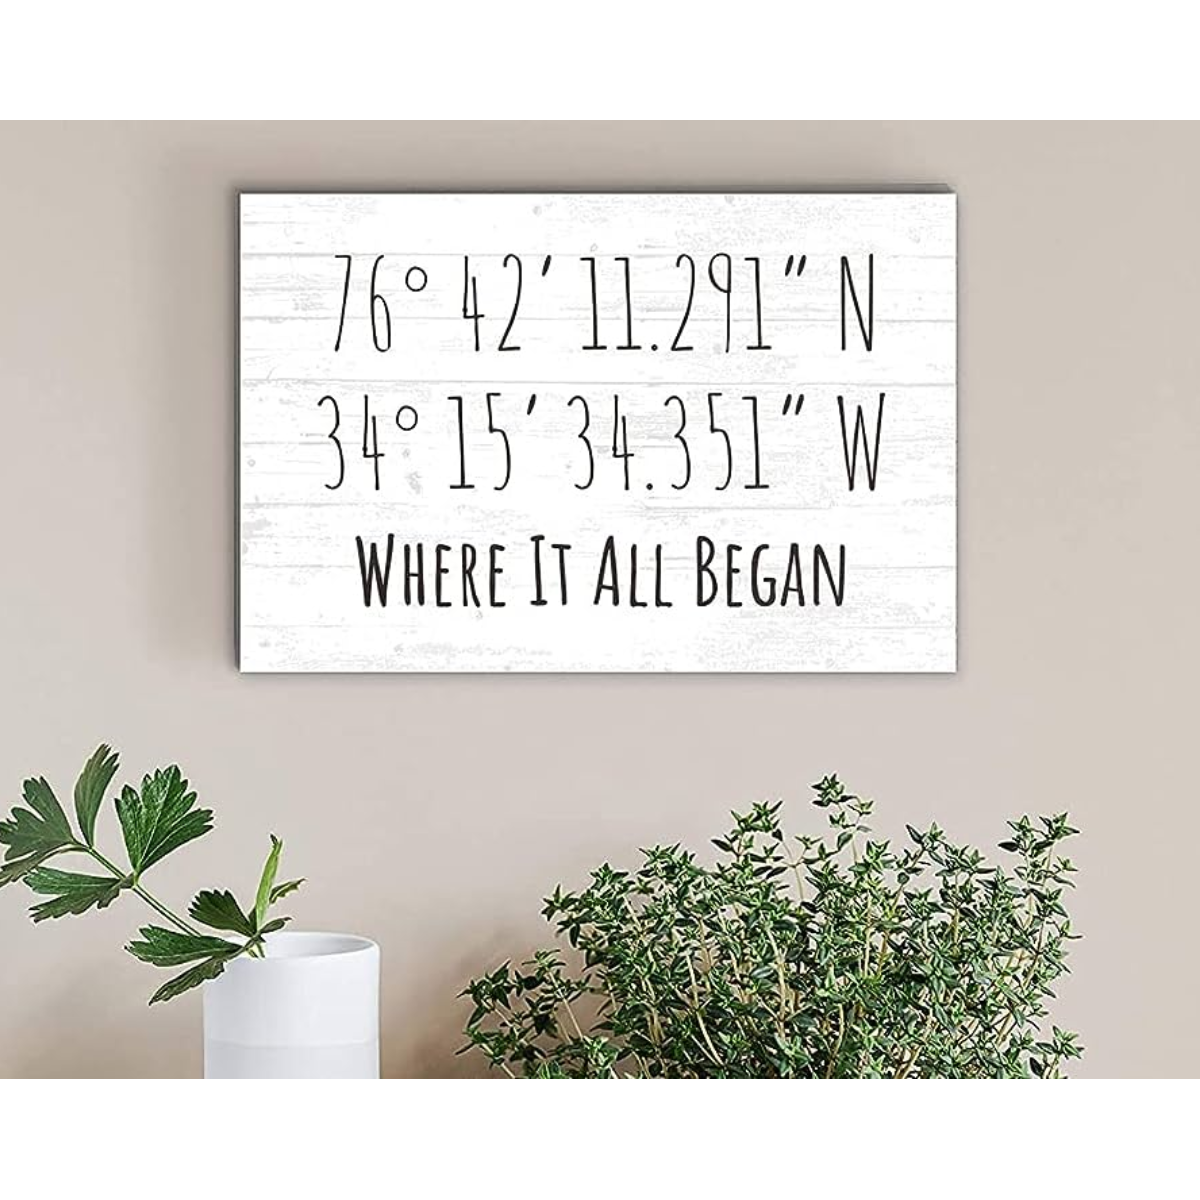 30. Customized Home Coordinates Wall Art: A Thoughtful and Unique Anniversary Gift Idea for Him